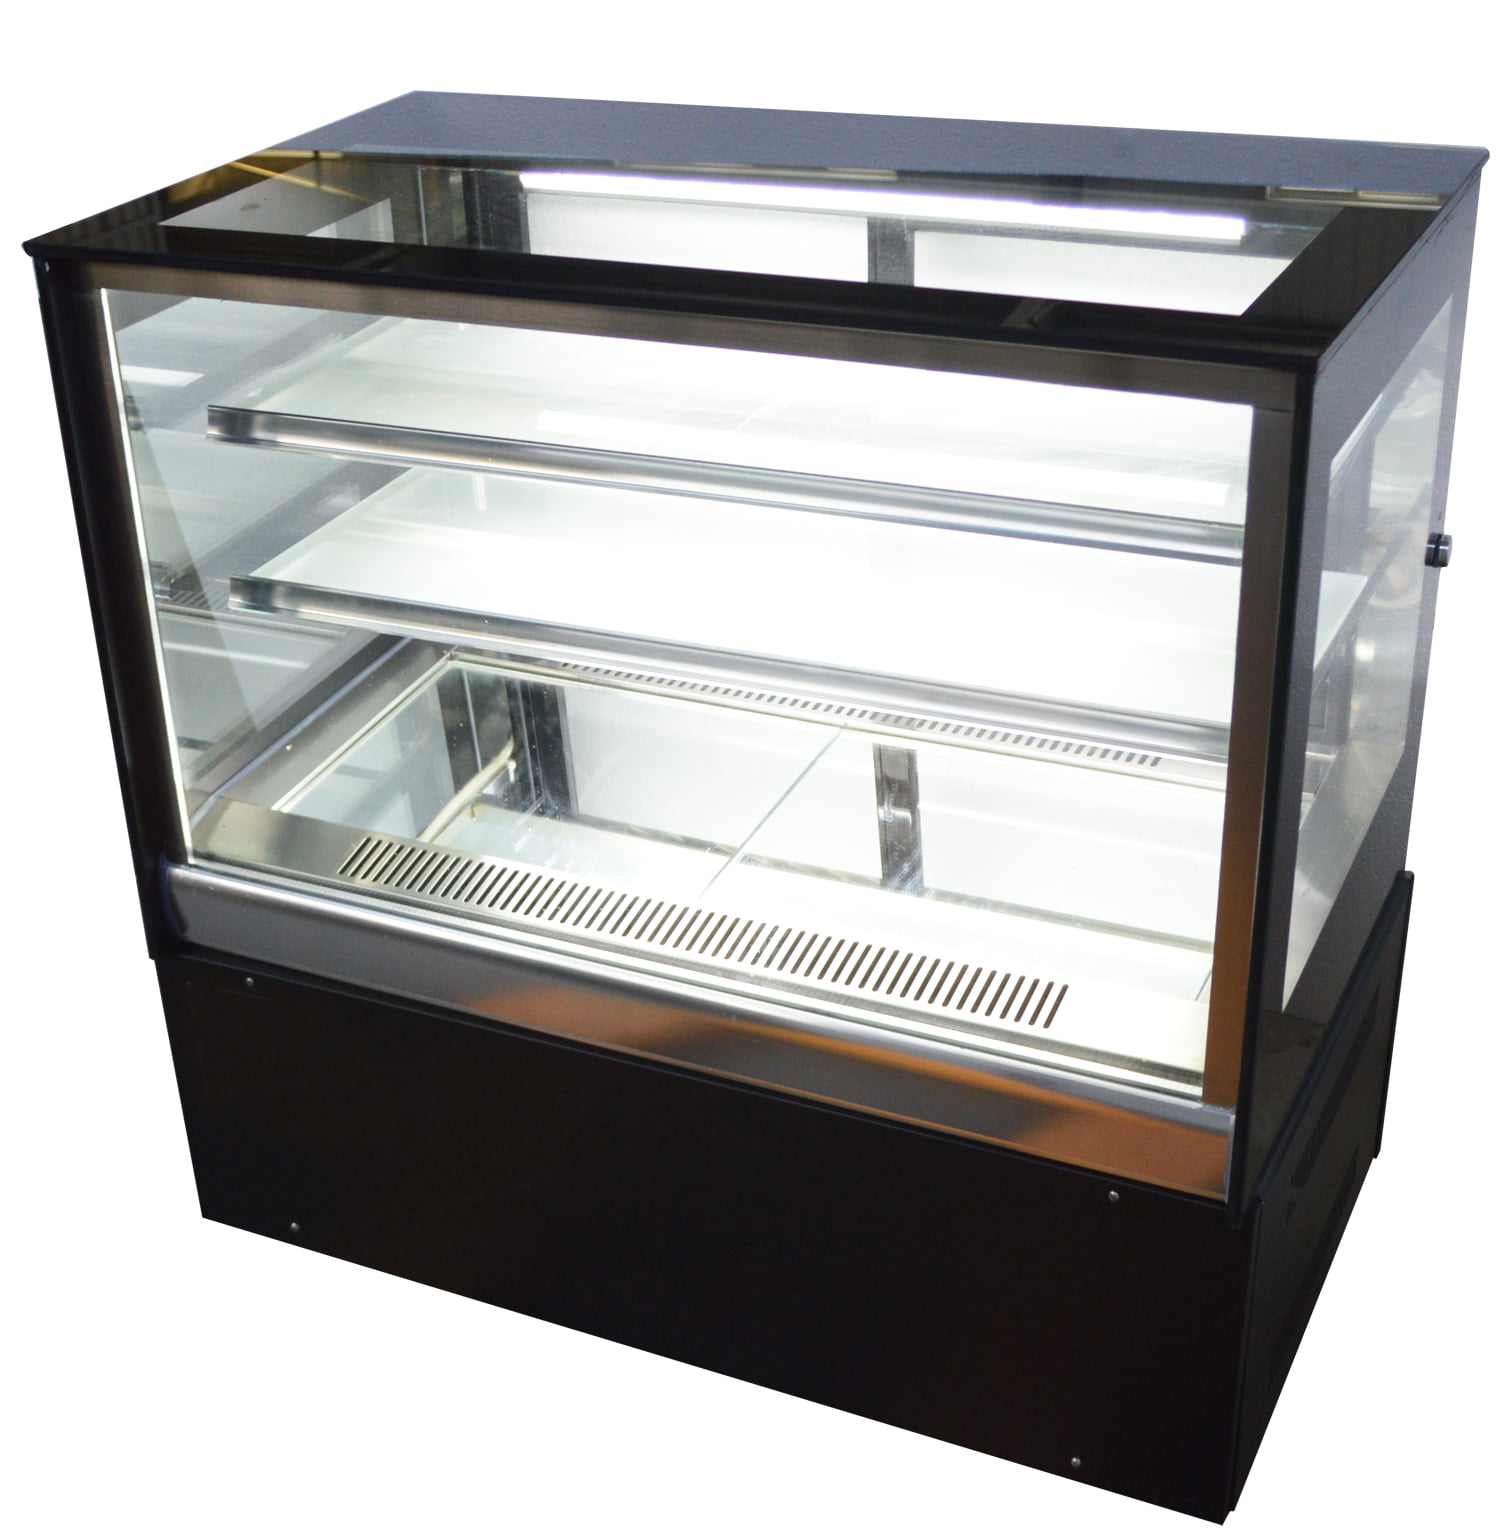 TECHTONGDA 220v Refrigerated Cake Showcase Countertop 3 Layers Display Cabinet for sale online 